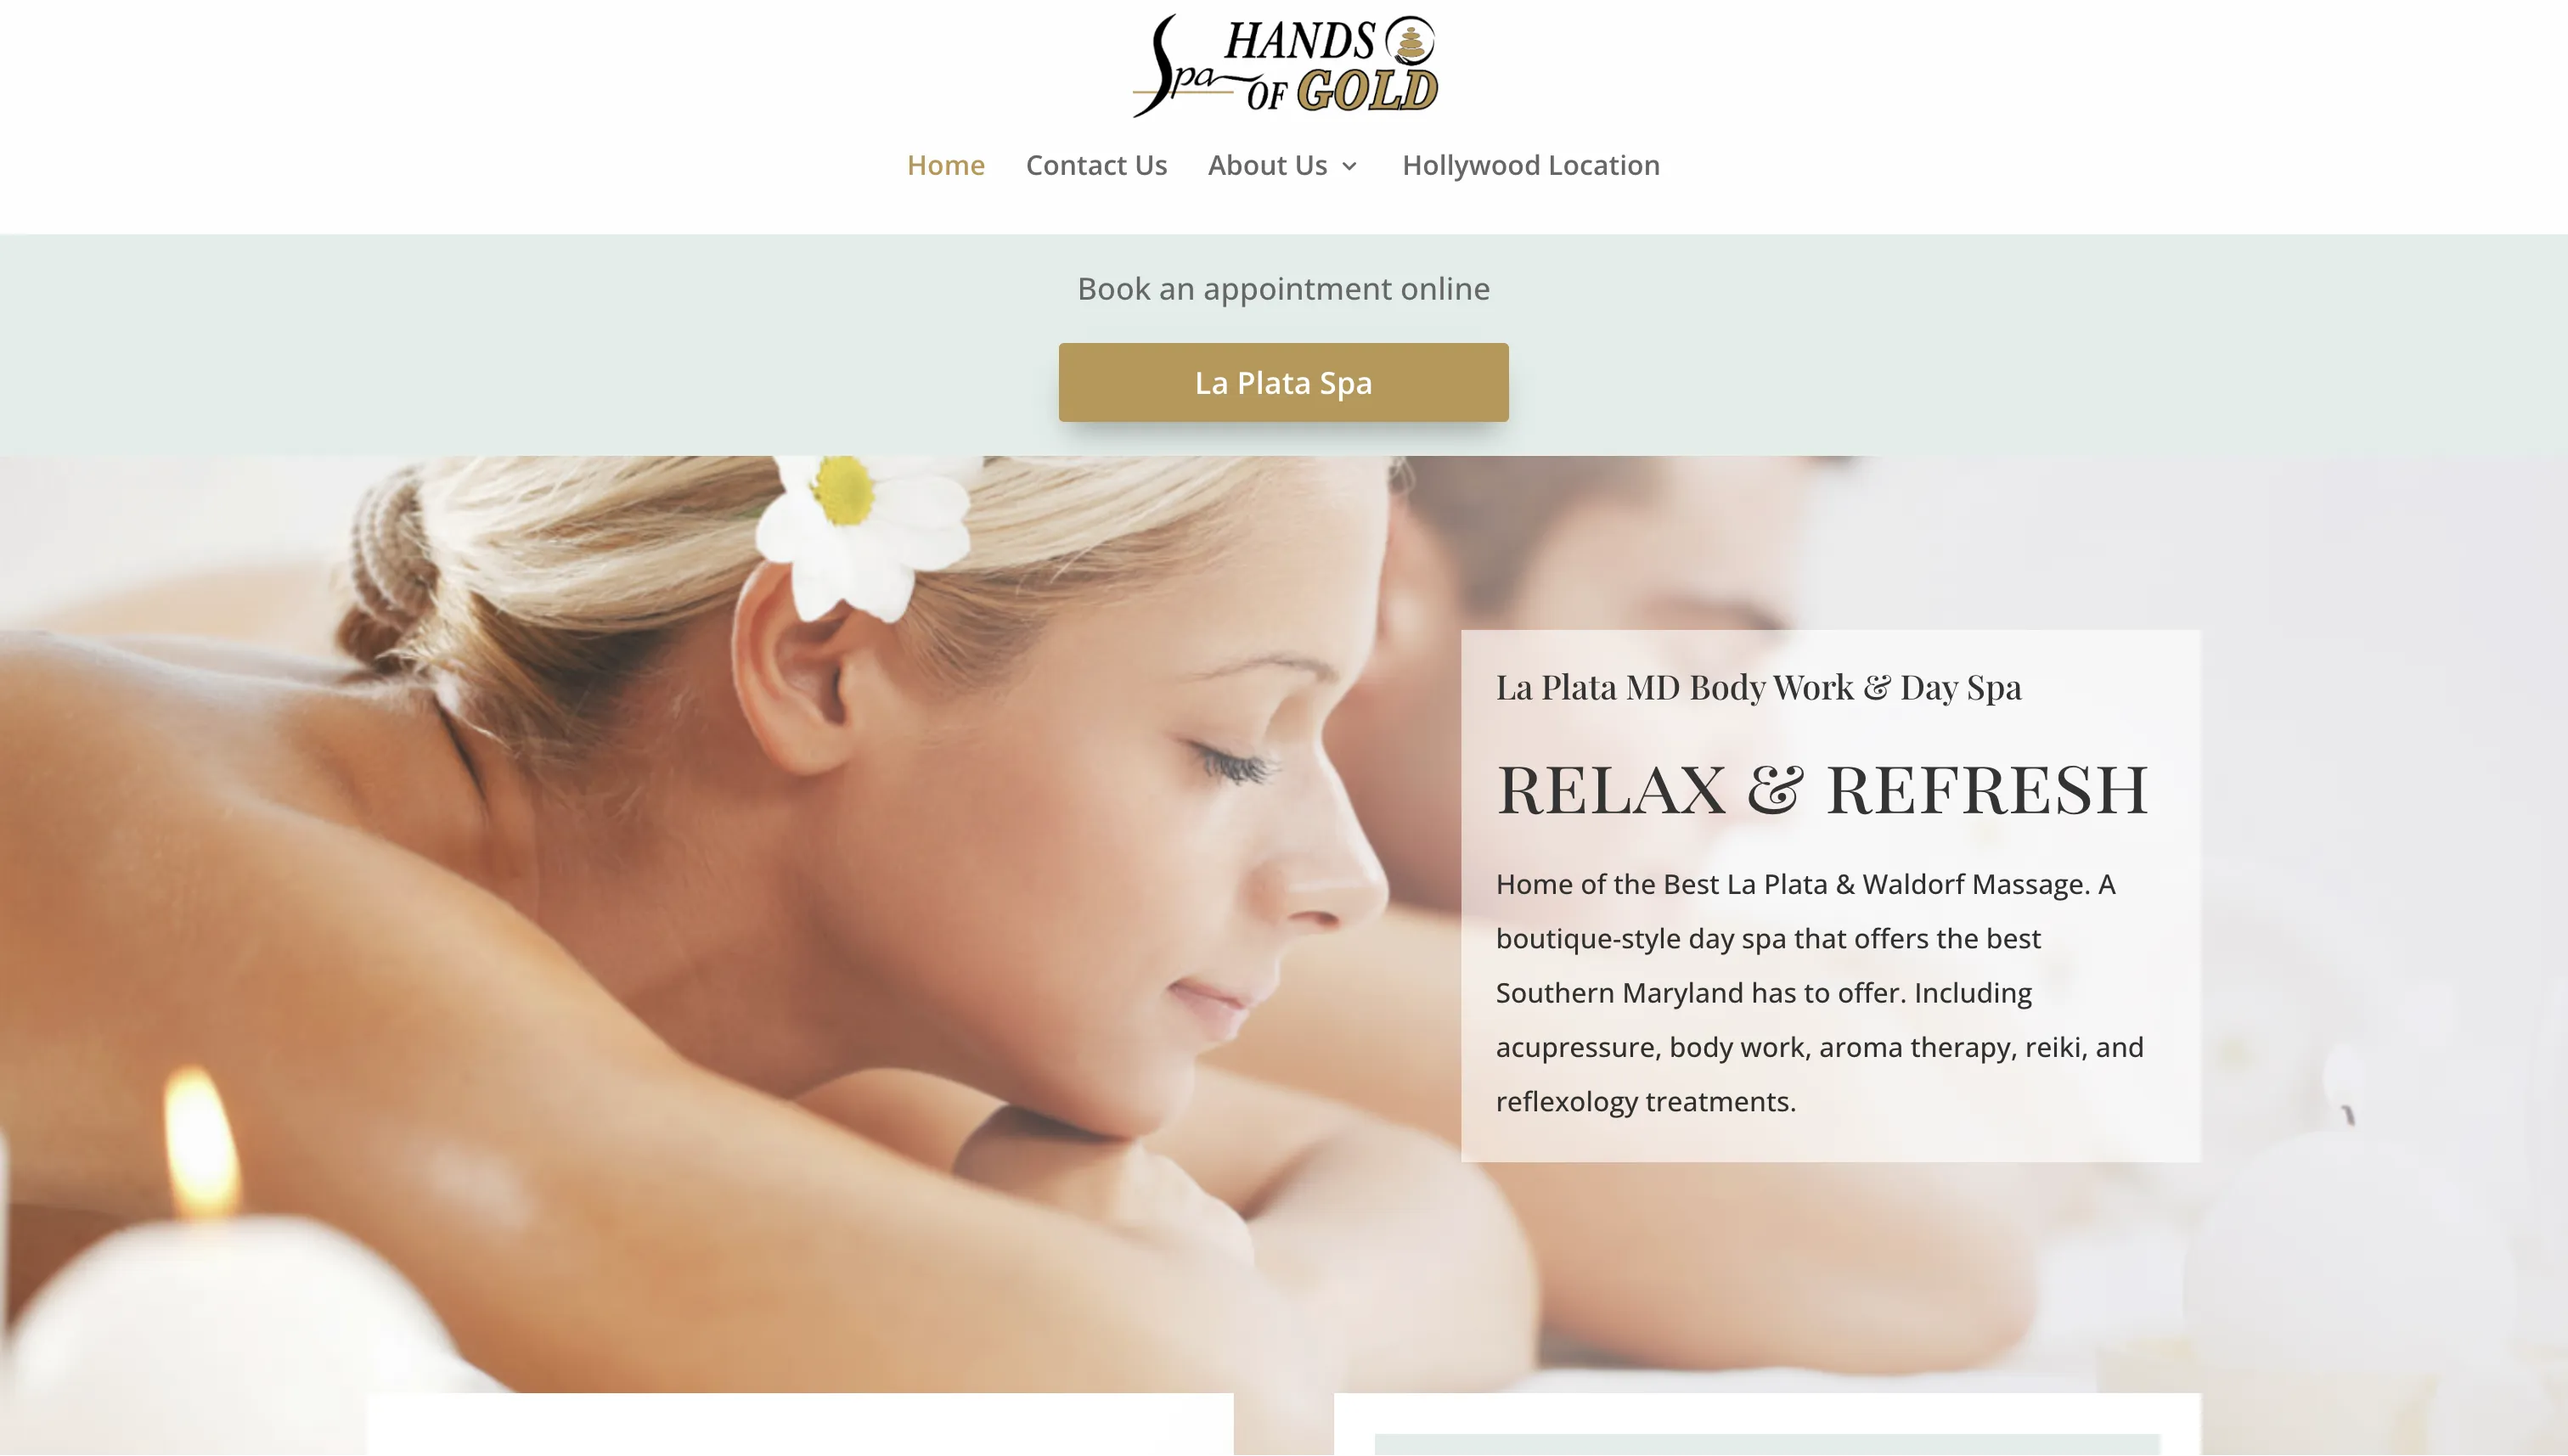 Spa Hands of Gold home page